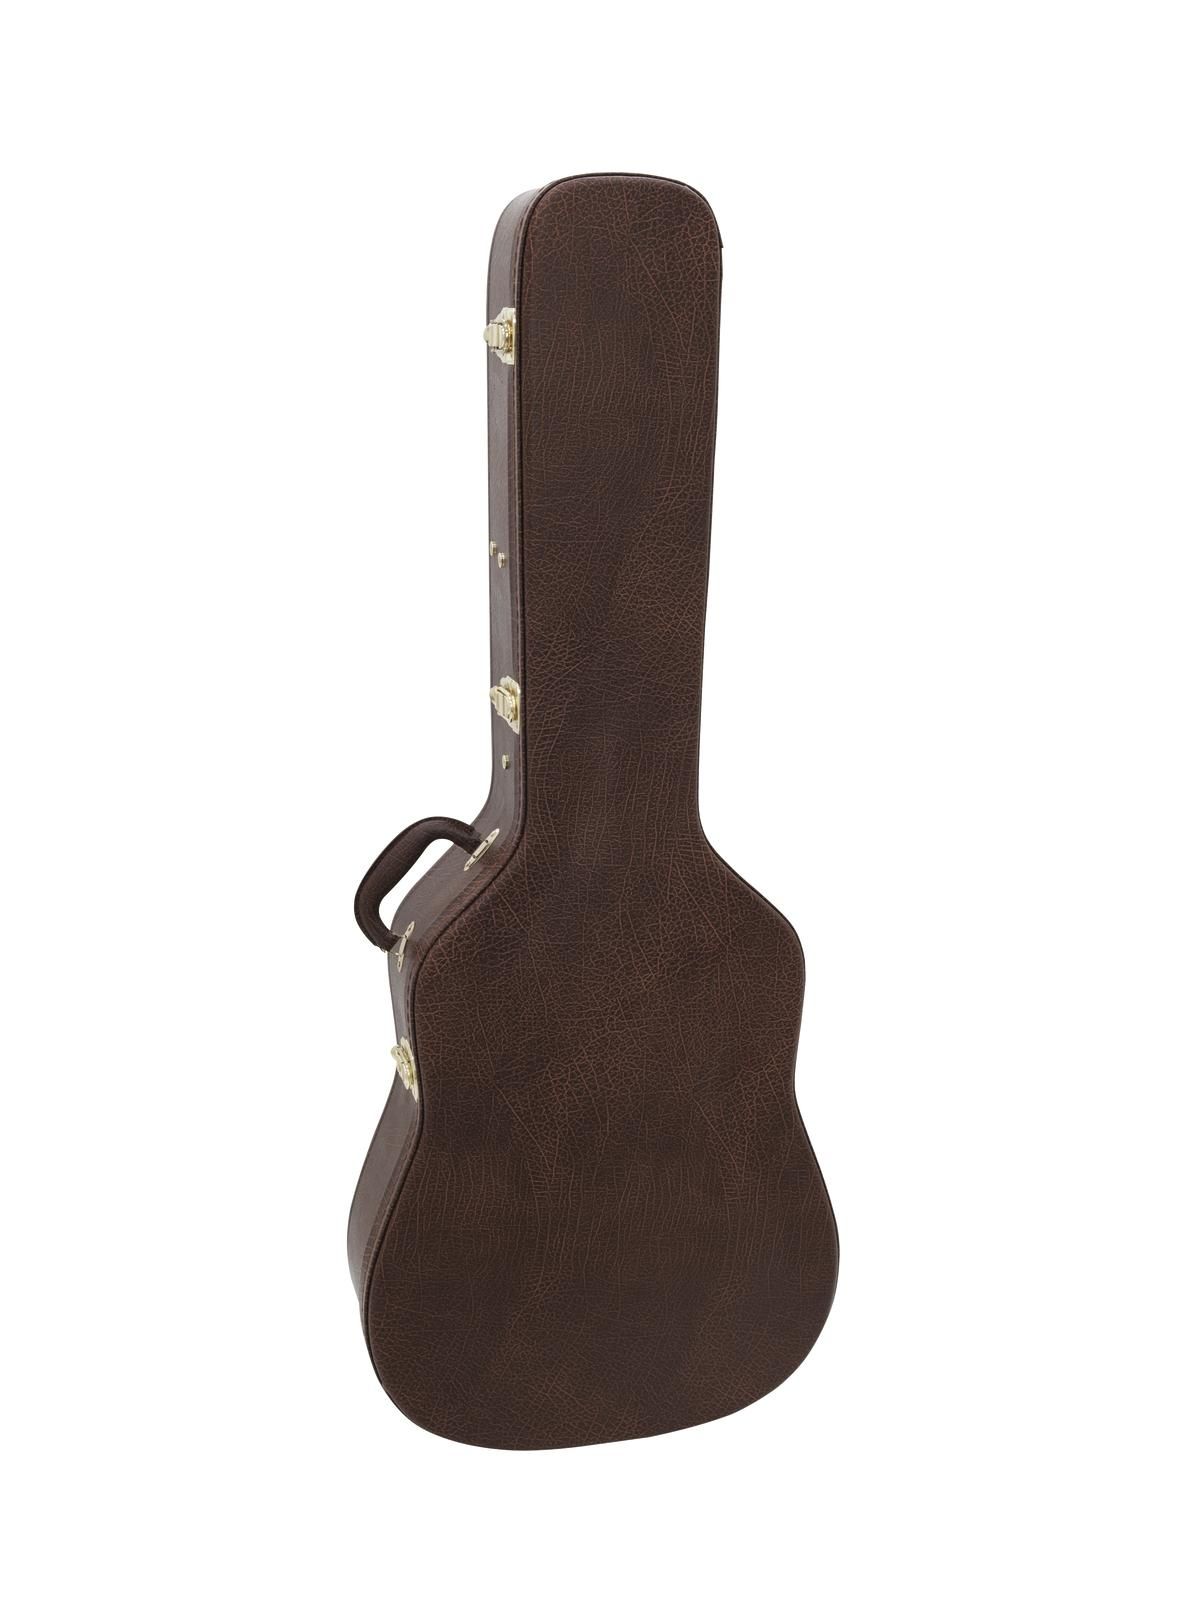 Dimavery Classic Guitar Form Case Brown 4/4